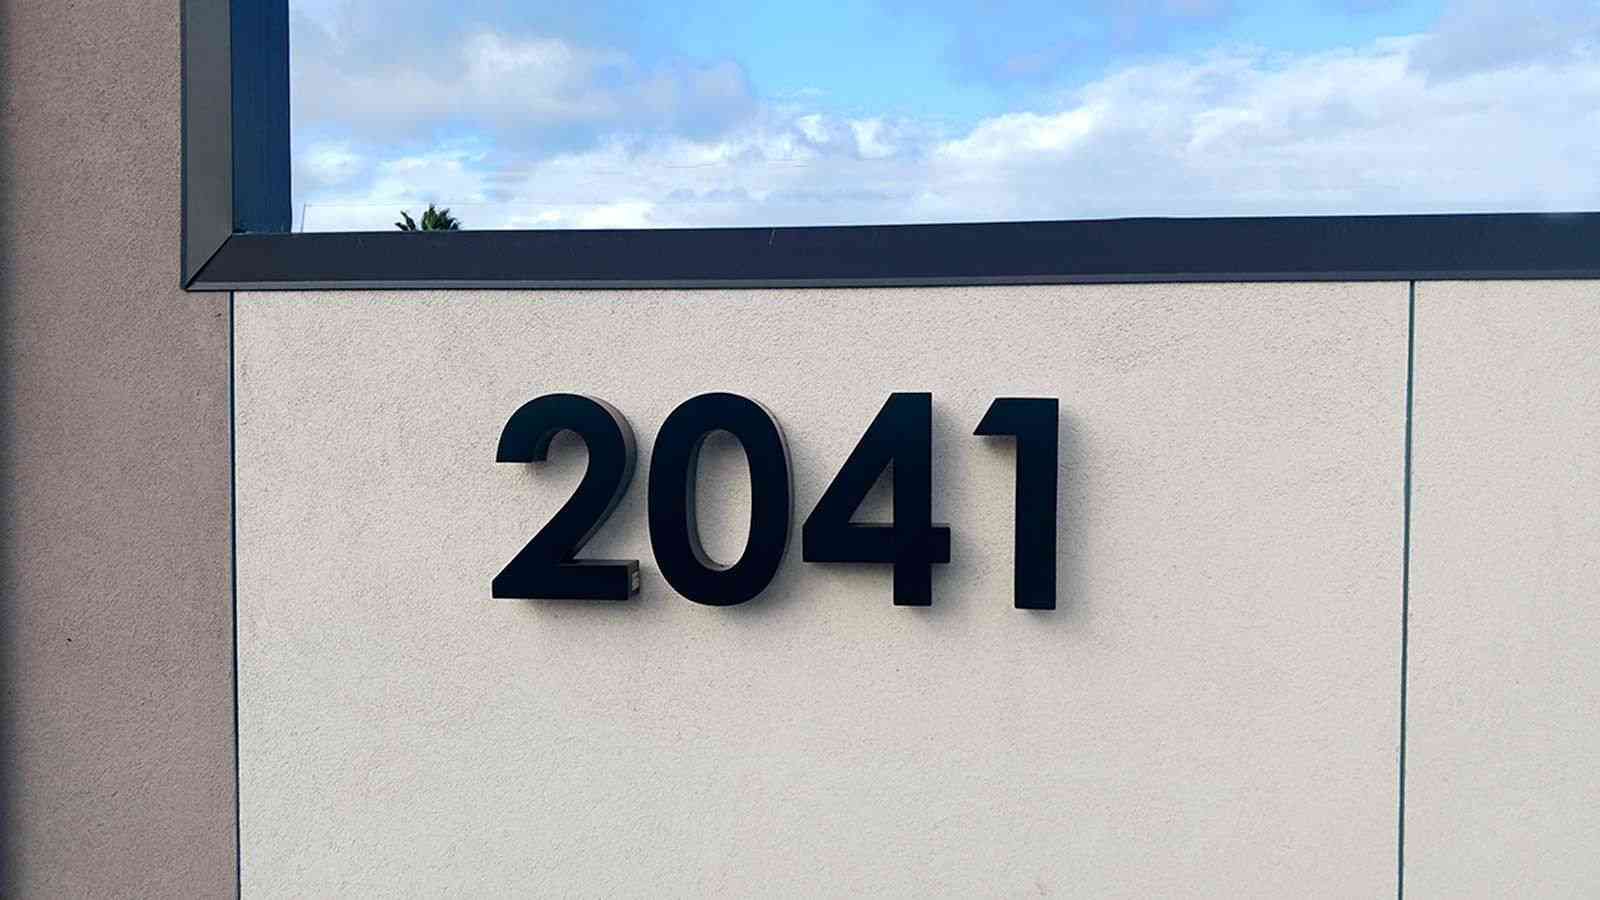 2041 address sign on the building